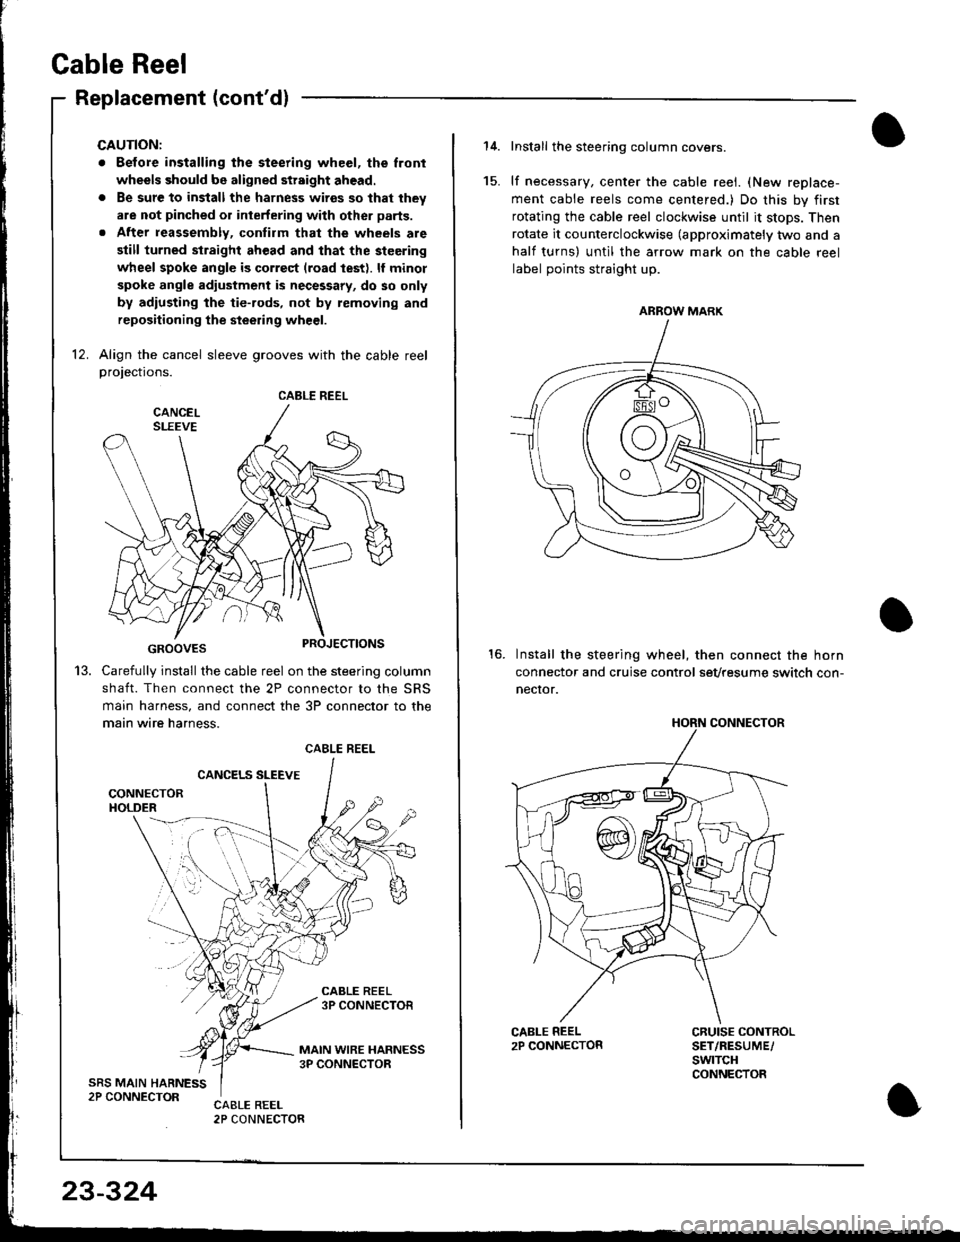 HONDA INTEGRA 1998 4.G Owners Manual Cable Reel
Replacement (contdl
CAUTION:
. Before installing the steering wheel, the lront
wheels should be aligned str8ight ahead.
. Be sure to install the harness wires so that they
are not pinched 